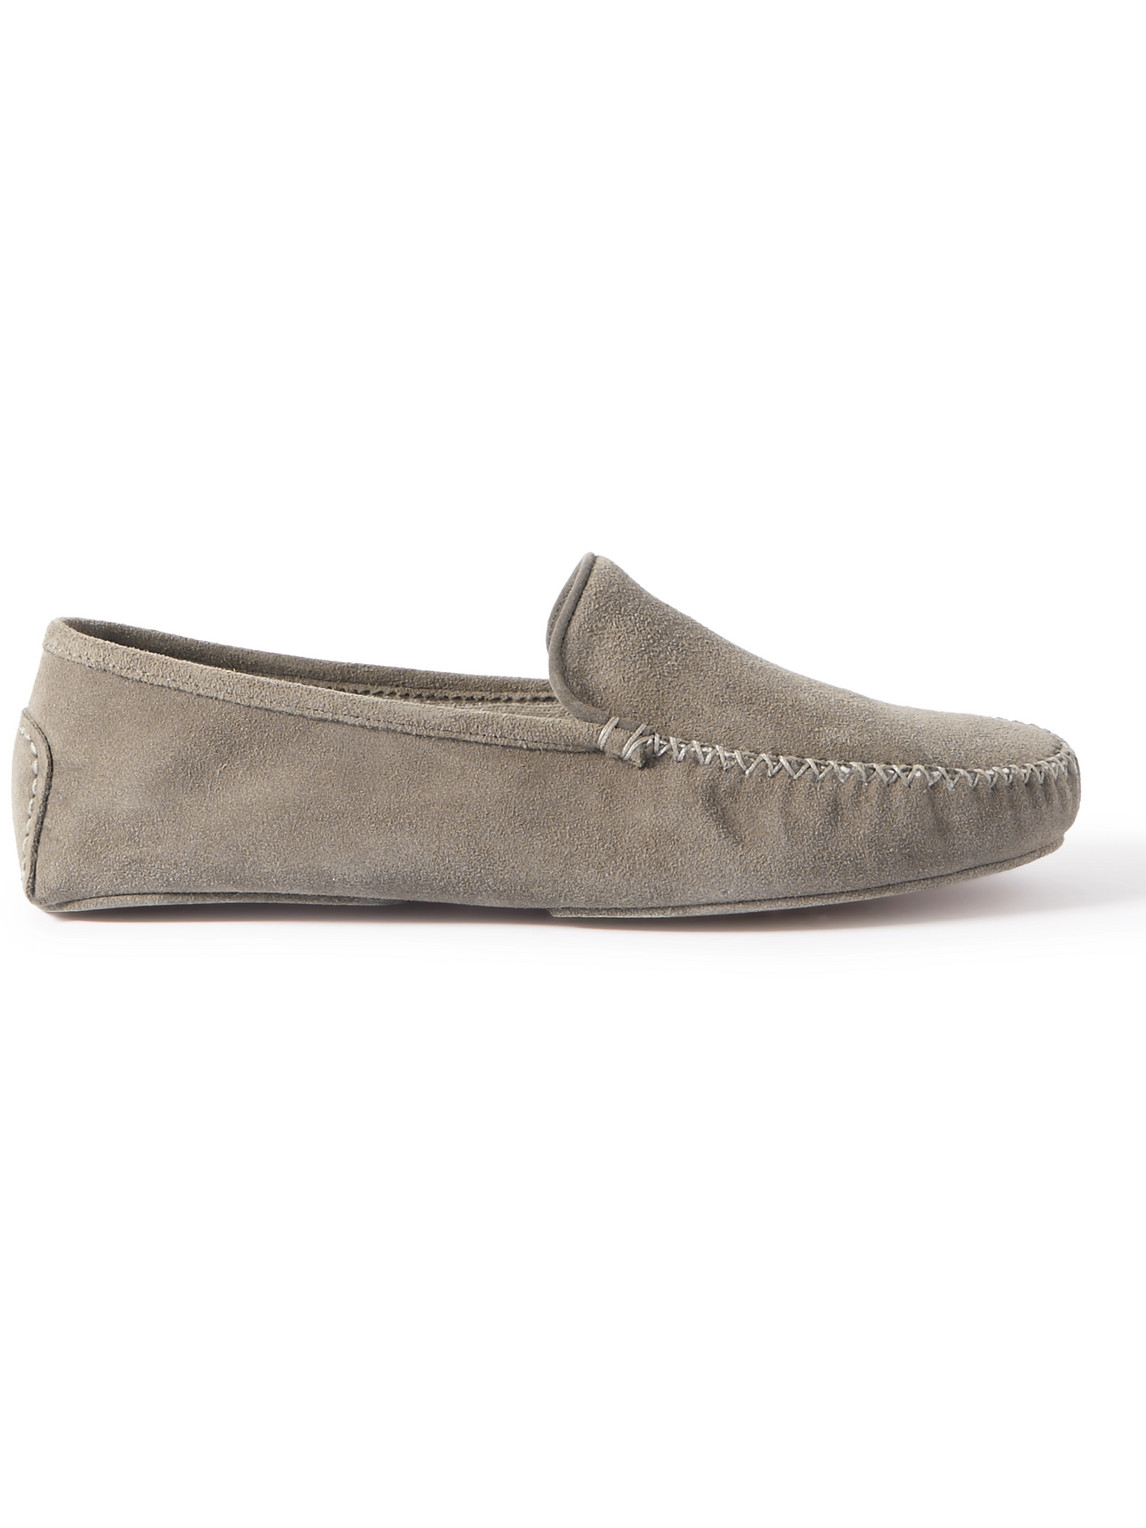 Thom Sweeney Cashmere-lined Suede Slippers In Brown